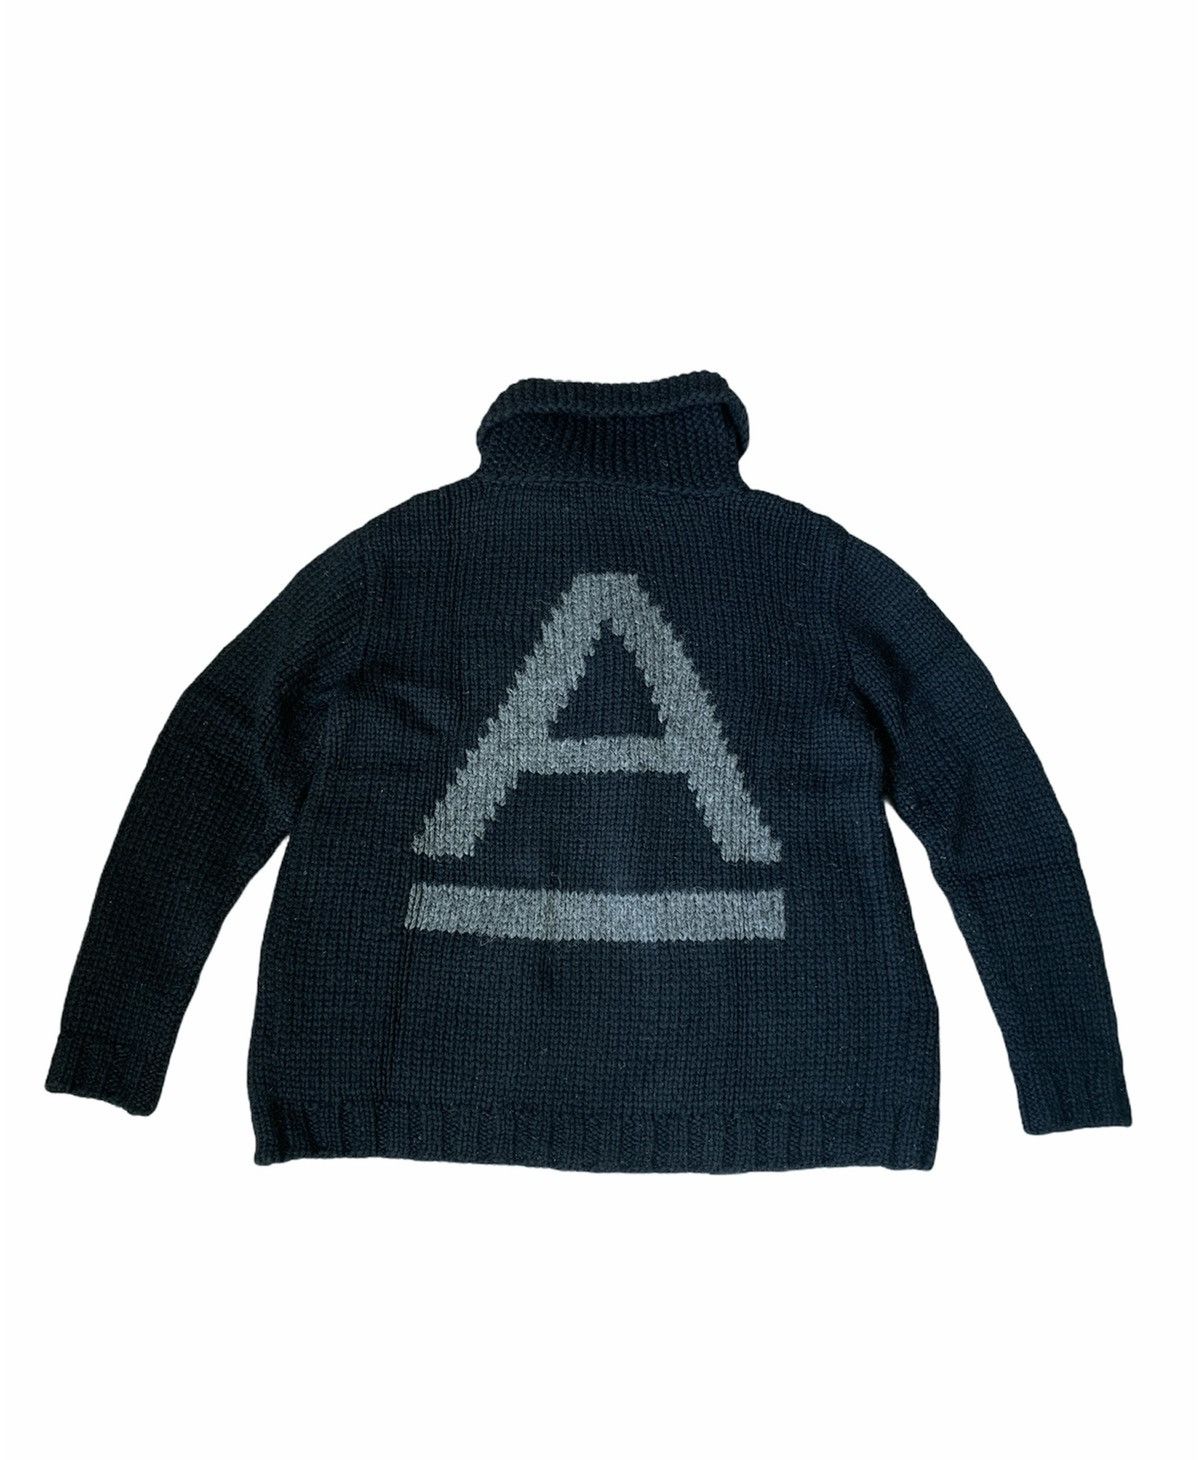 Undercover Undercover Anarchy Intarsia Hand Knit Cardigan Size US M / EU 48-50 / 2 - 1 Preview